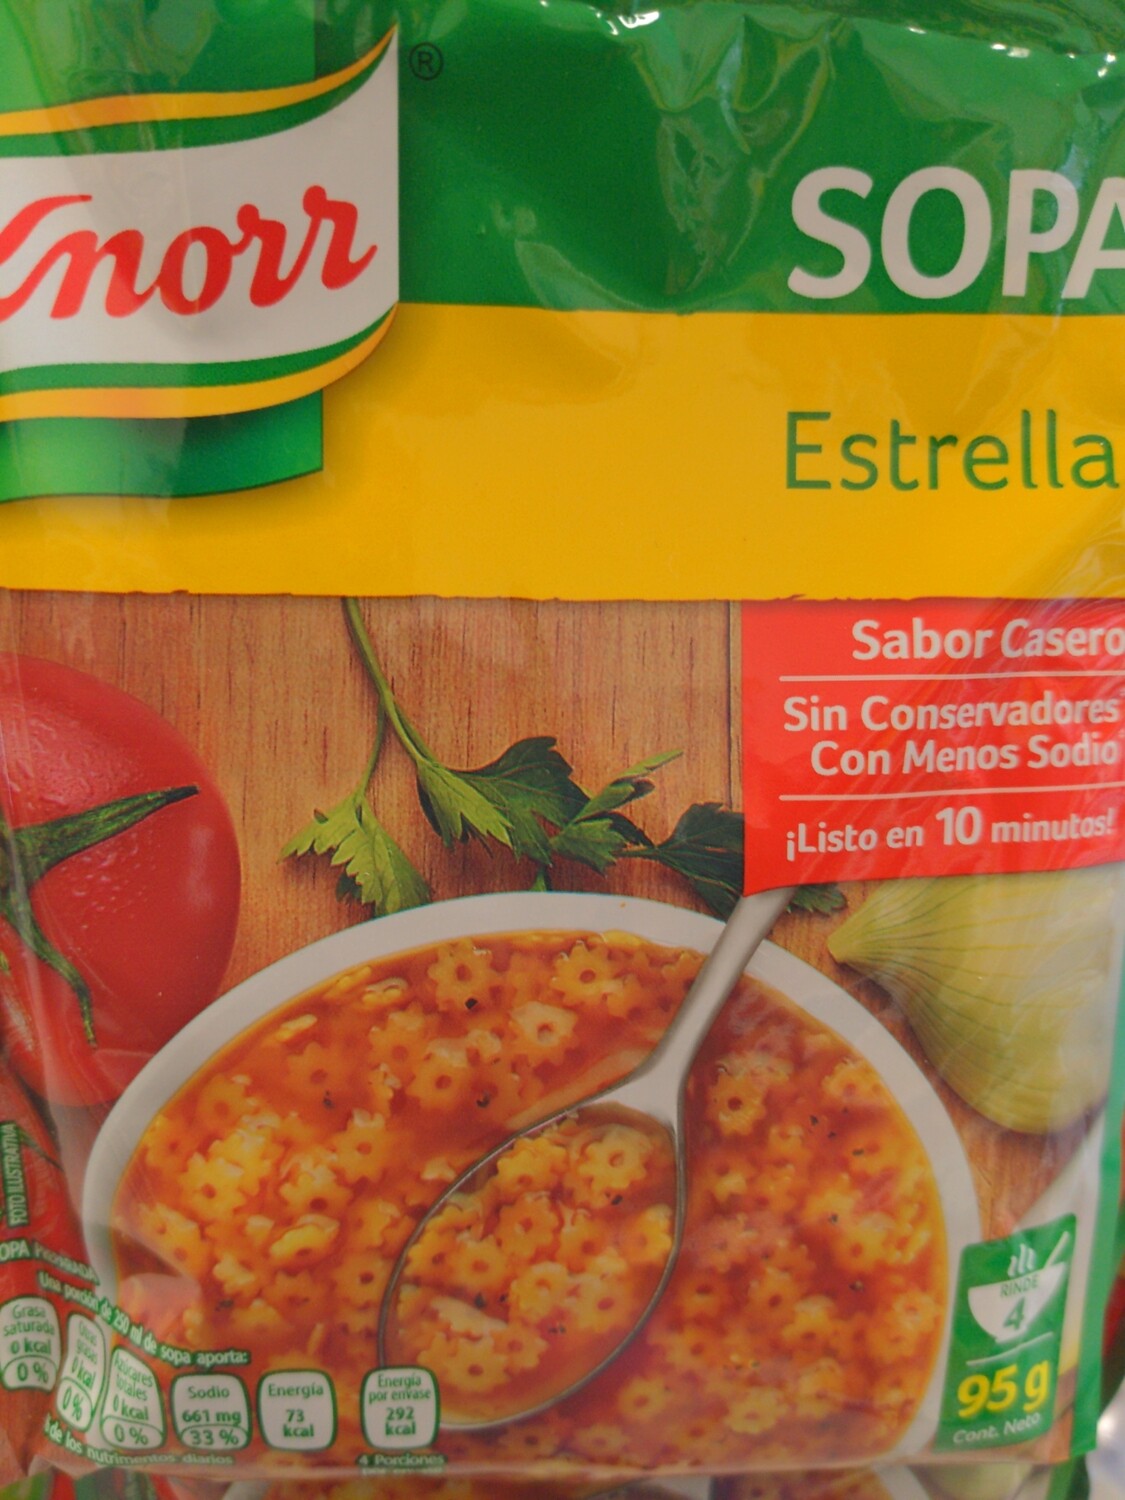 Knorr fideo soup